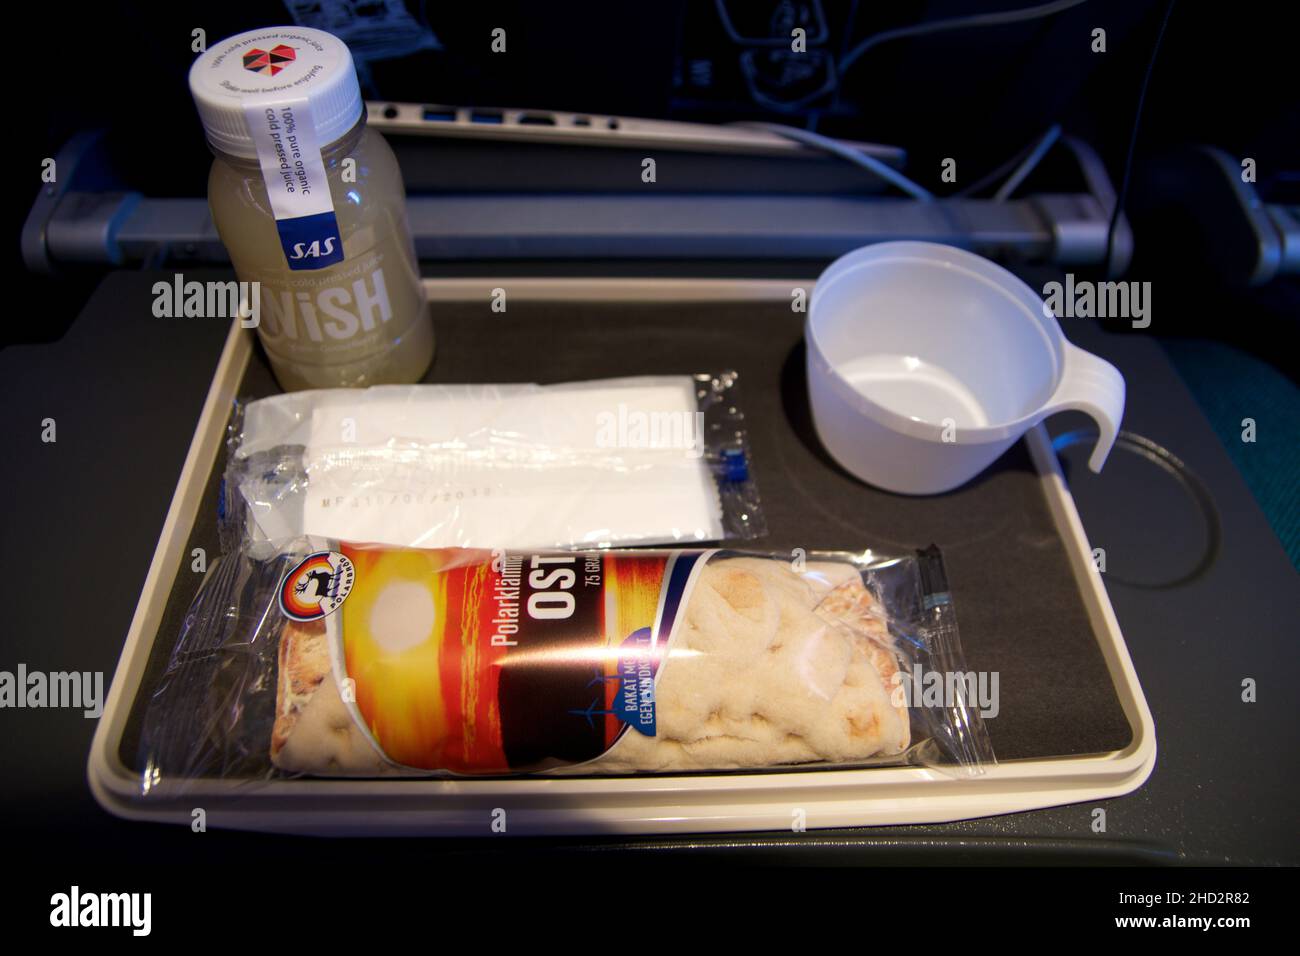 STOCKHOLM, SWEDEN - 24 NOV 2018: Inflight snack on an economy class flight. Plane meal consisting of smoothie and wrap Stock Photo